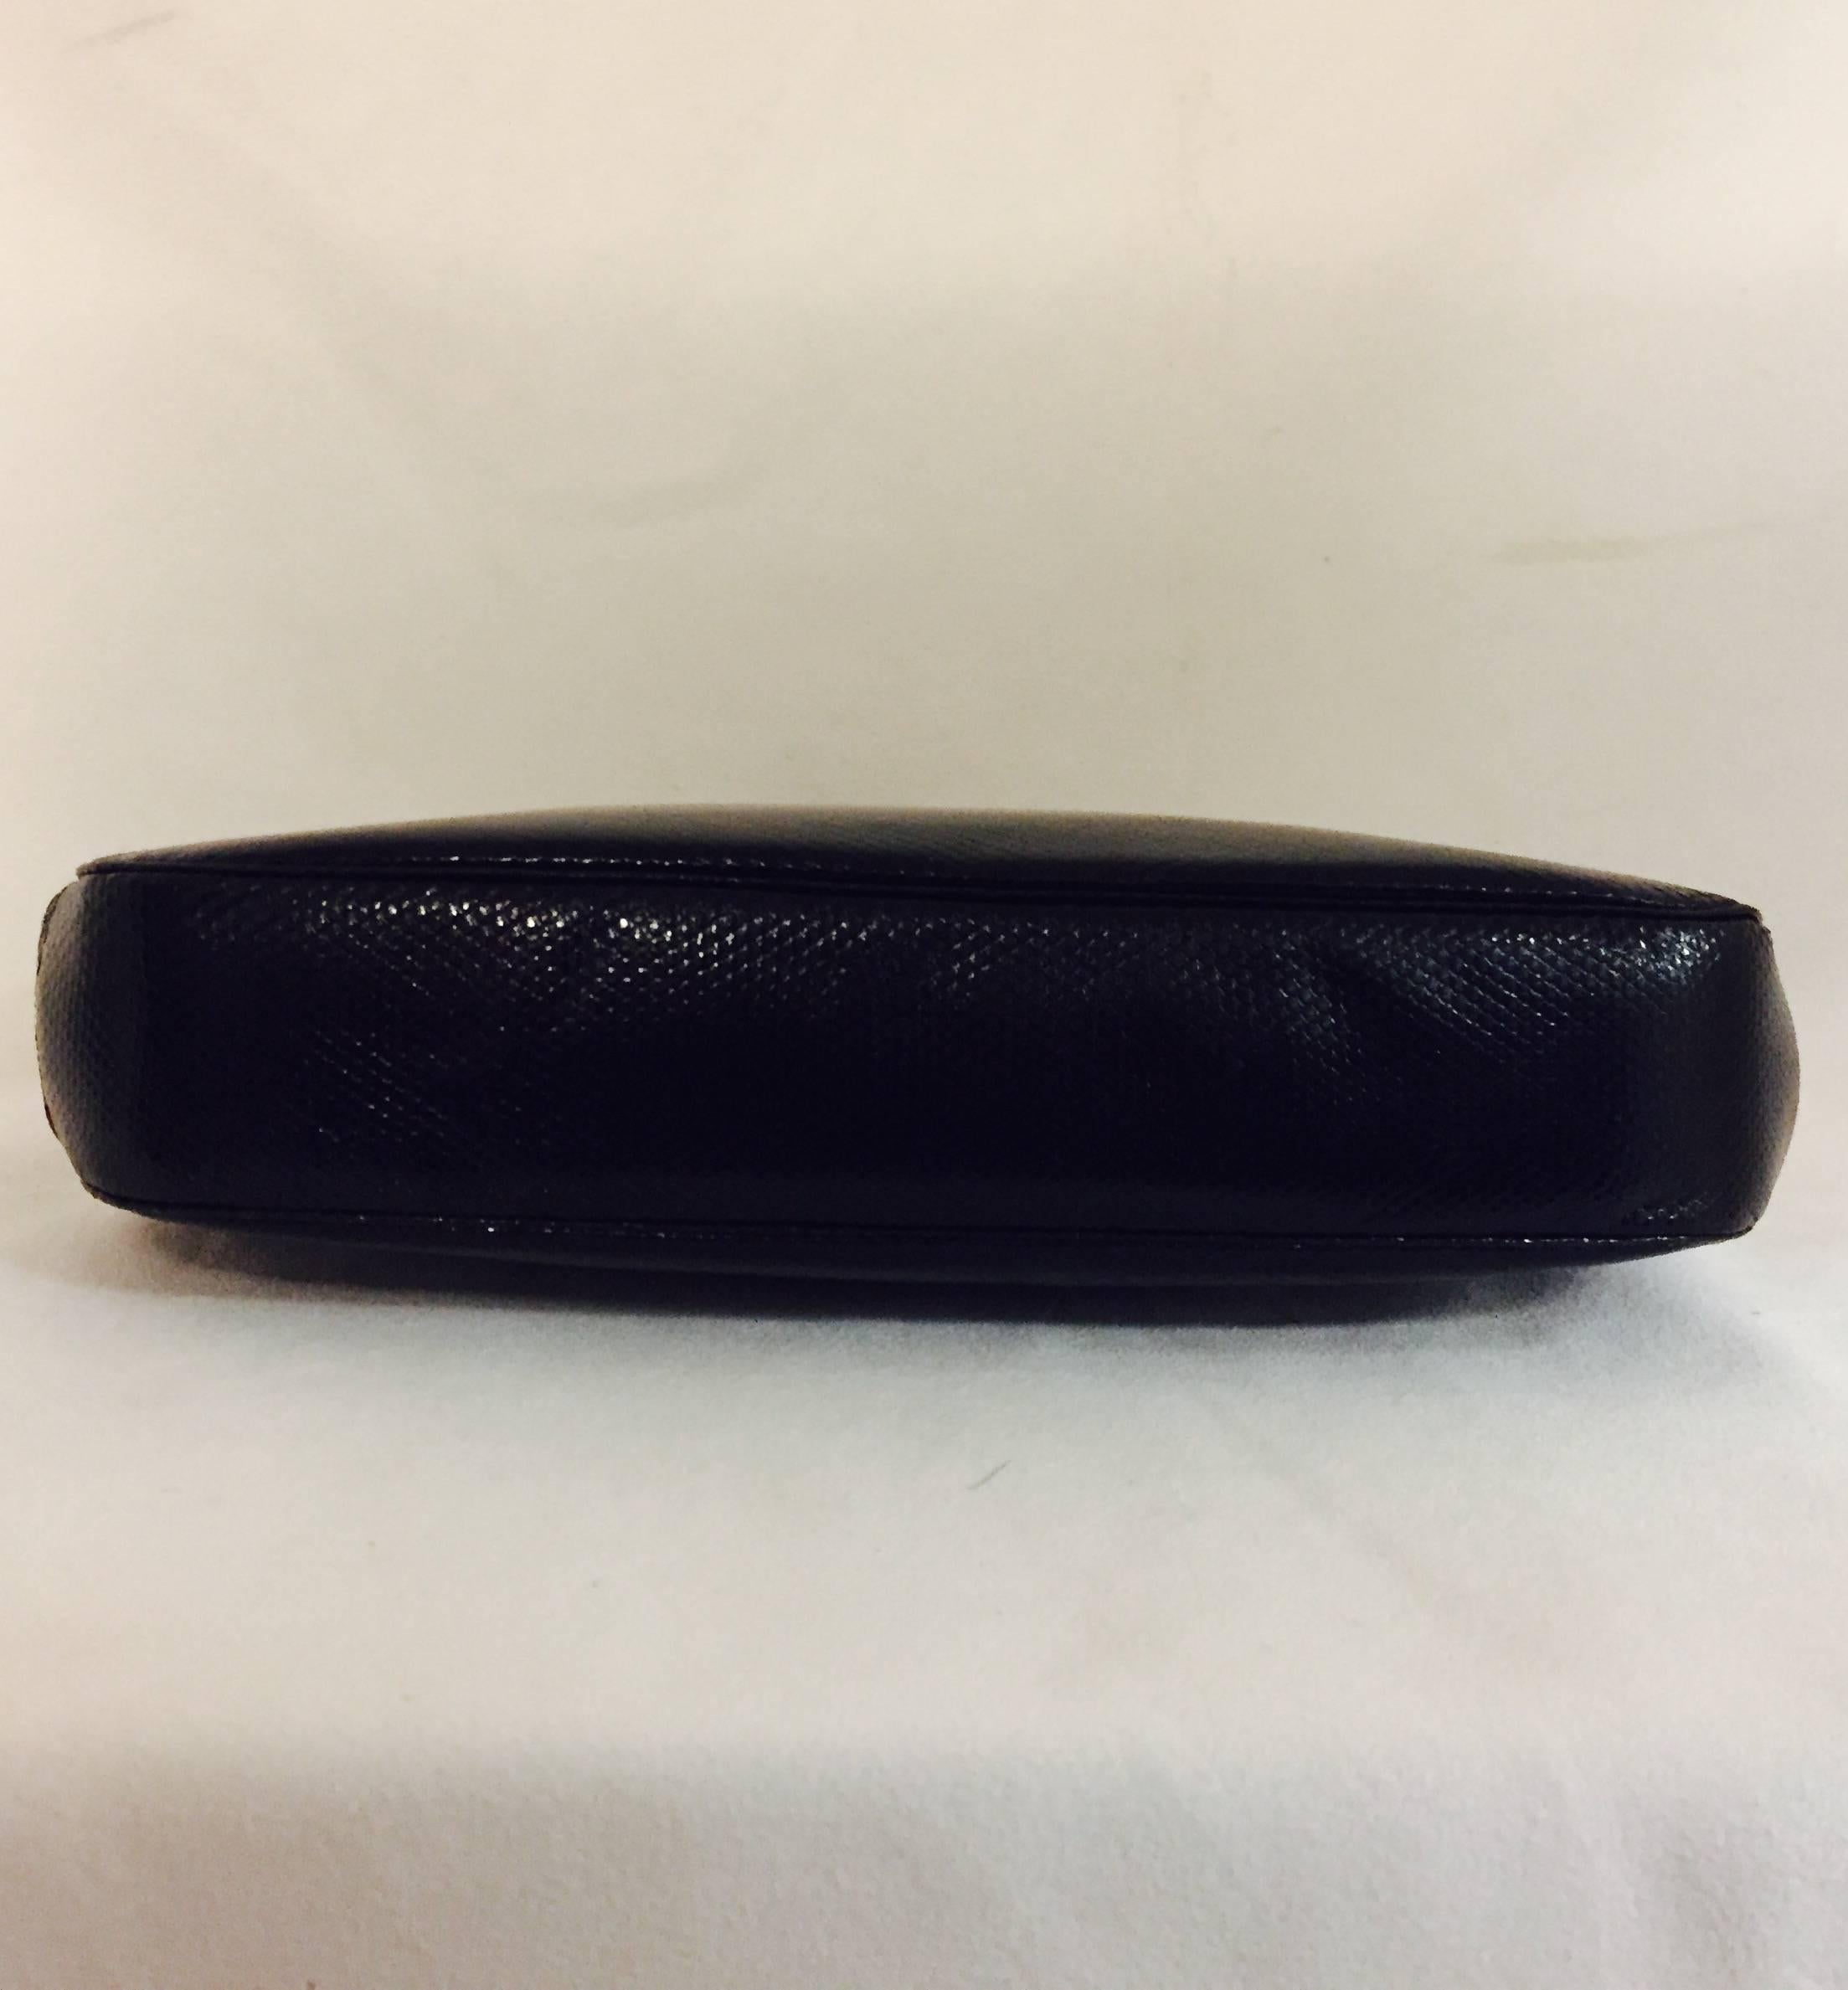 Jeweled Judith Leiber Black Lizard Timeless Clutch/Shoulder Bag  In Excellent Condition For Sale In Palm Beach, FL